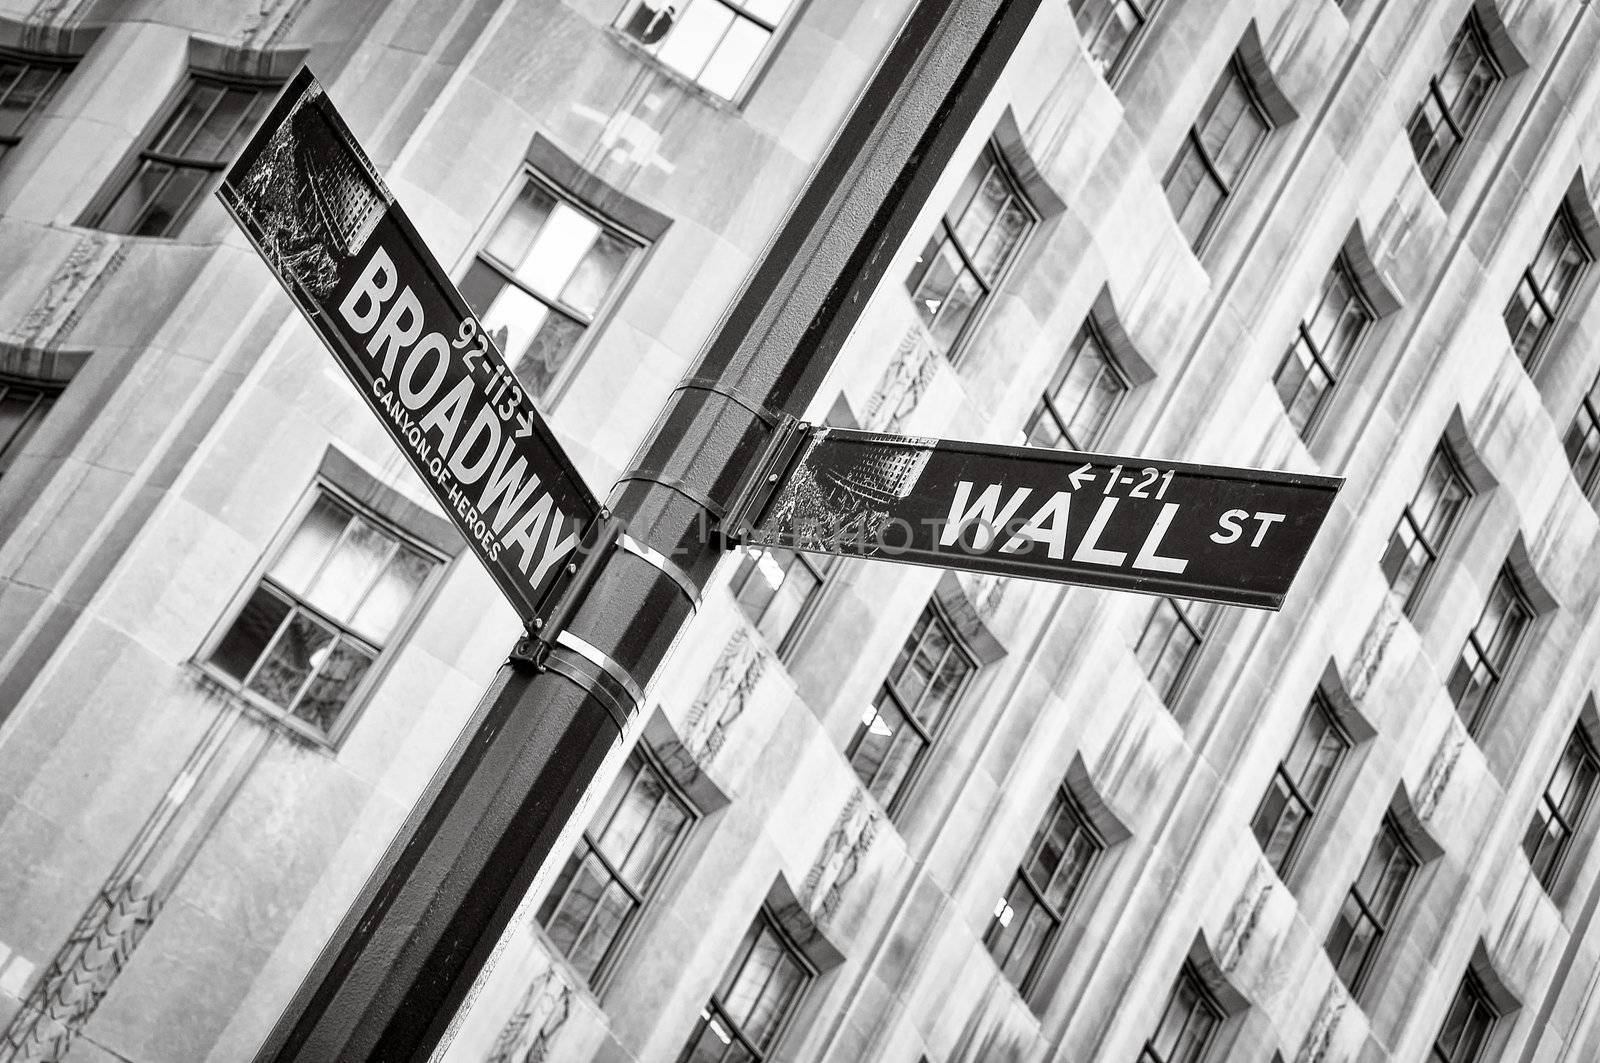 Wall street and Broadway street sign black and white, New York, USA